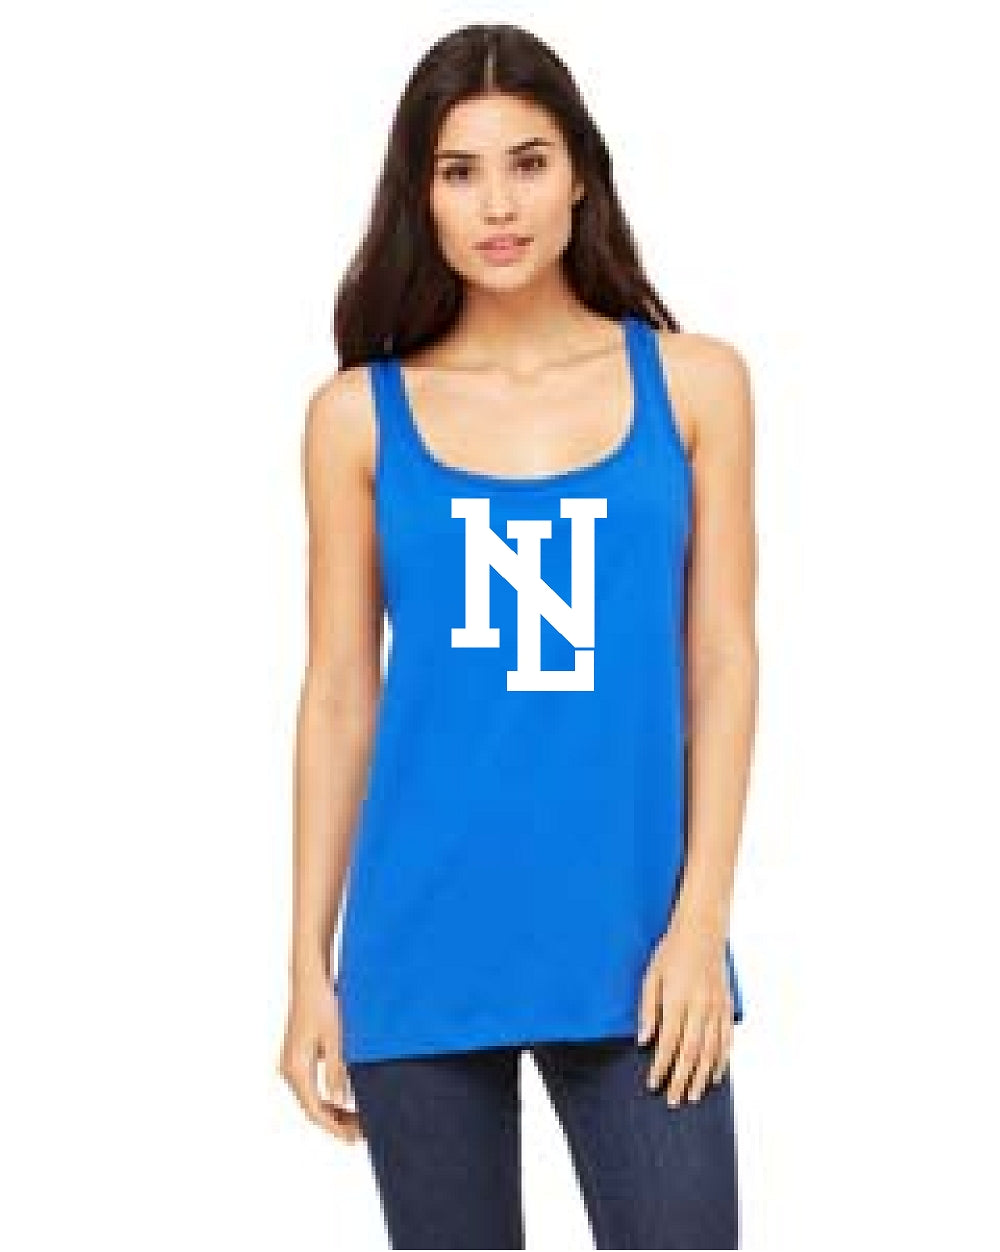 Bella + Canvas Ladies' Relaxed Jersey Tank